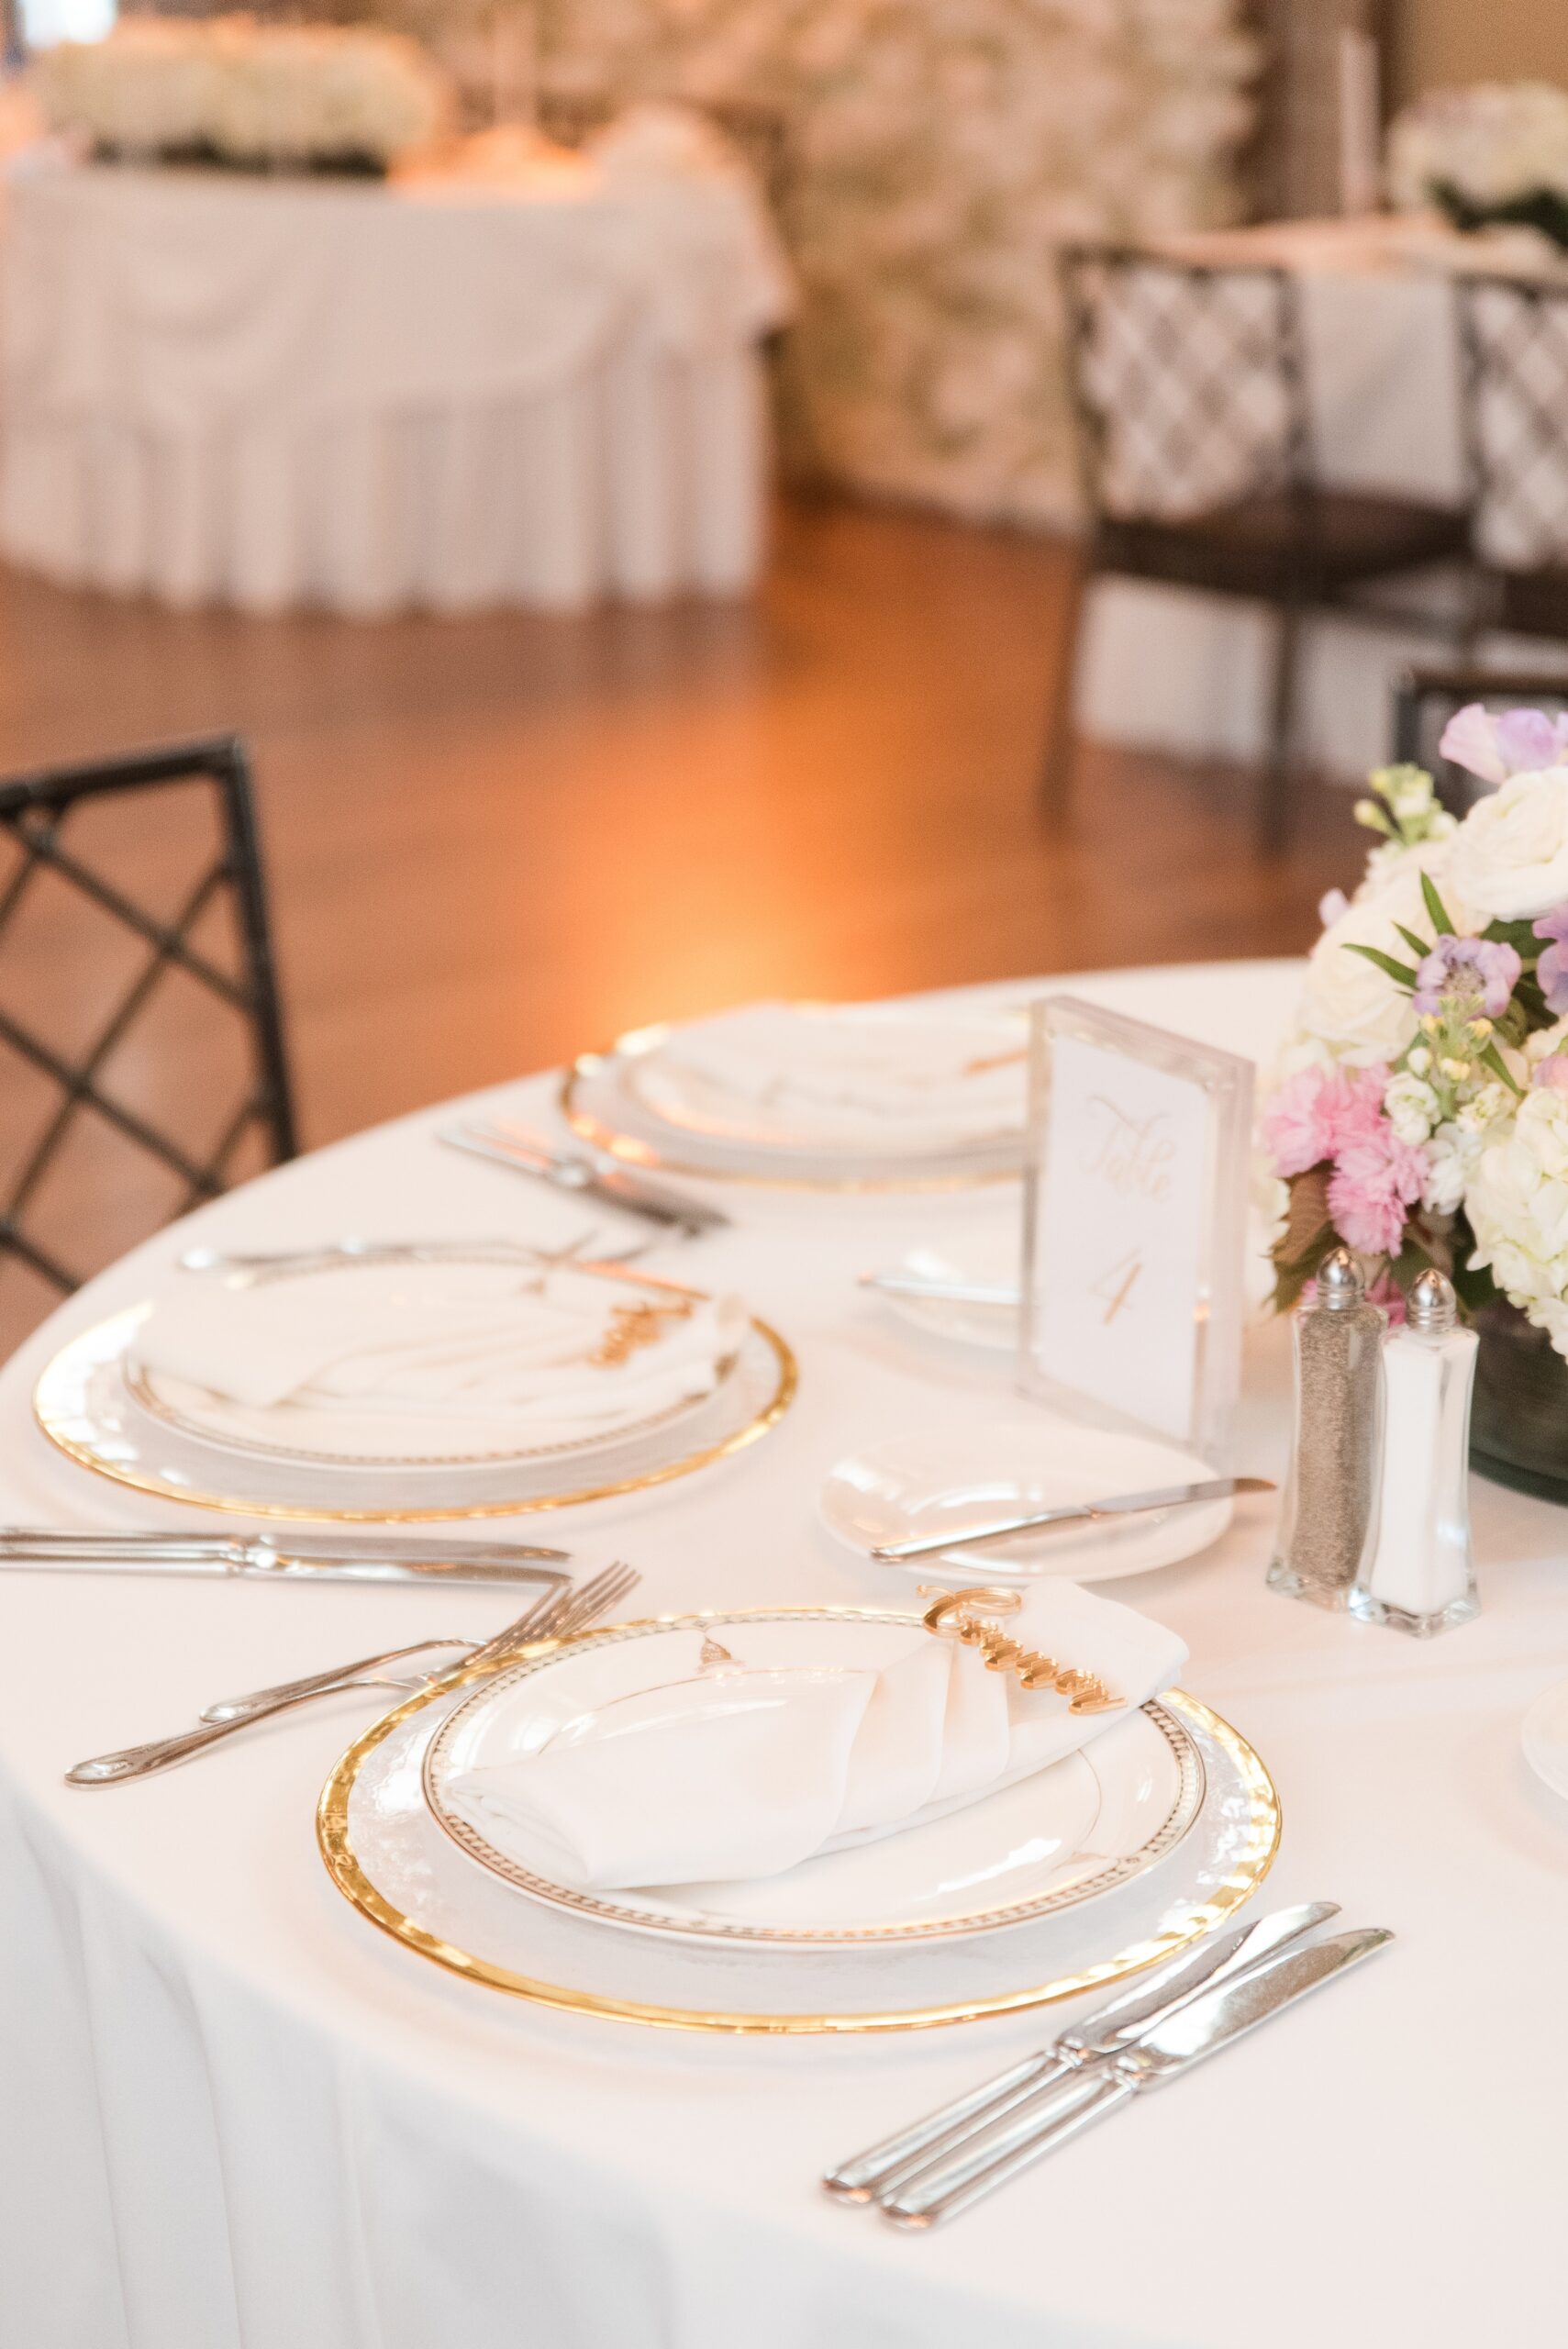 Details of a Congressional Country Club Wedding reception place setting with gold rimmed dishes